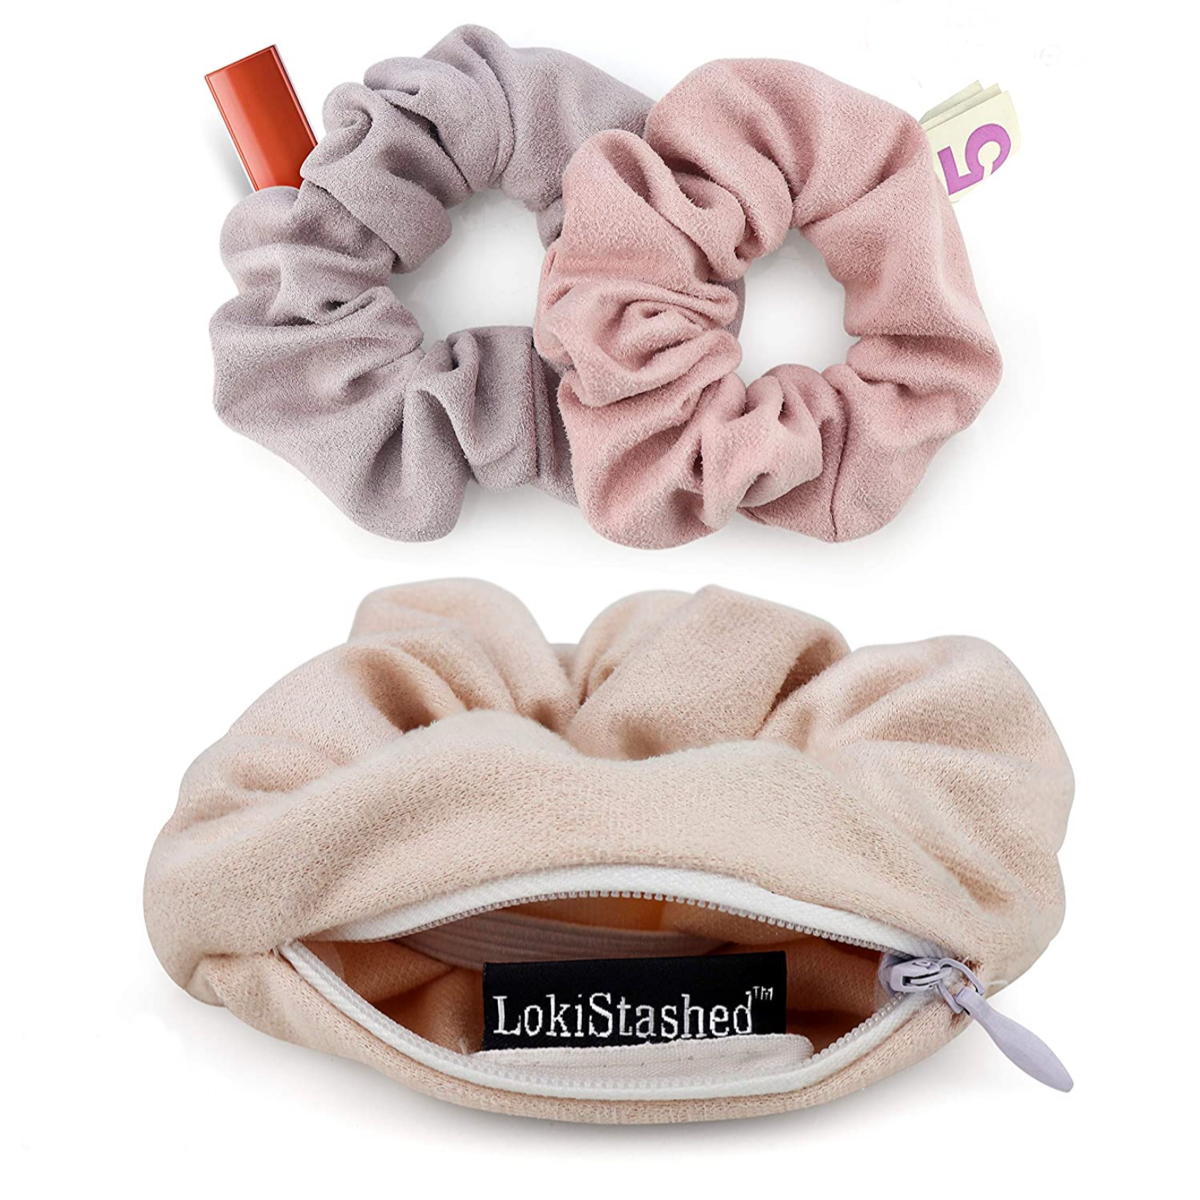 This $12 Pack of Scrunchies on Amazon Can Hide Cash, Lip Balm & More